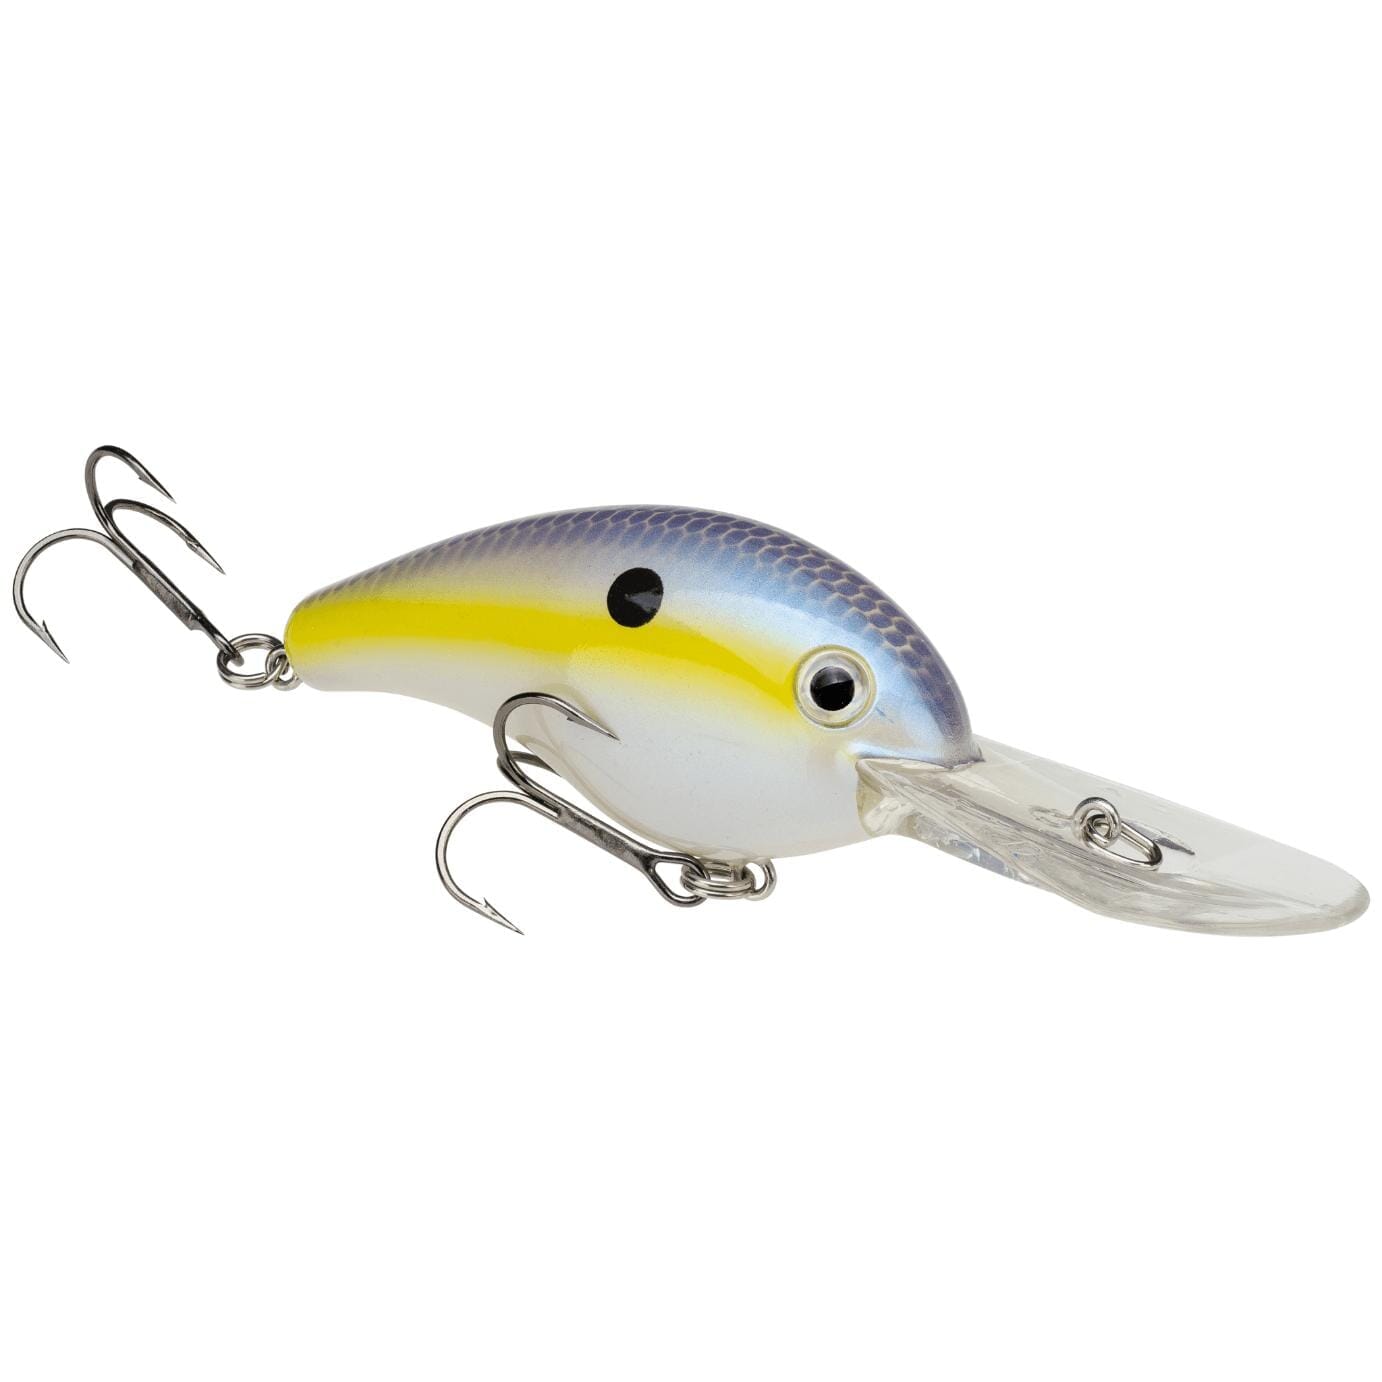 Strike King Pro-Model 5Xd Chartreuse Shad